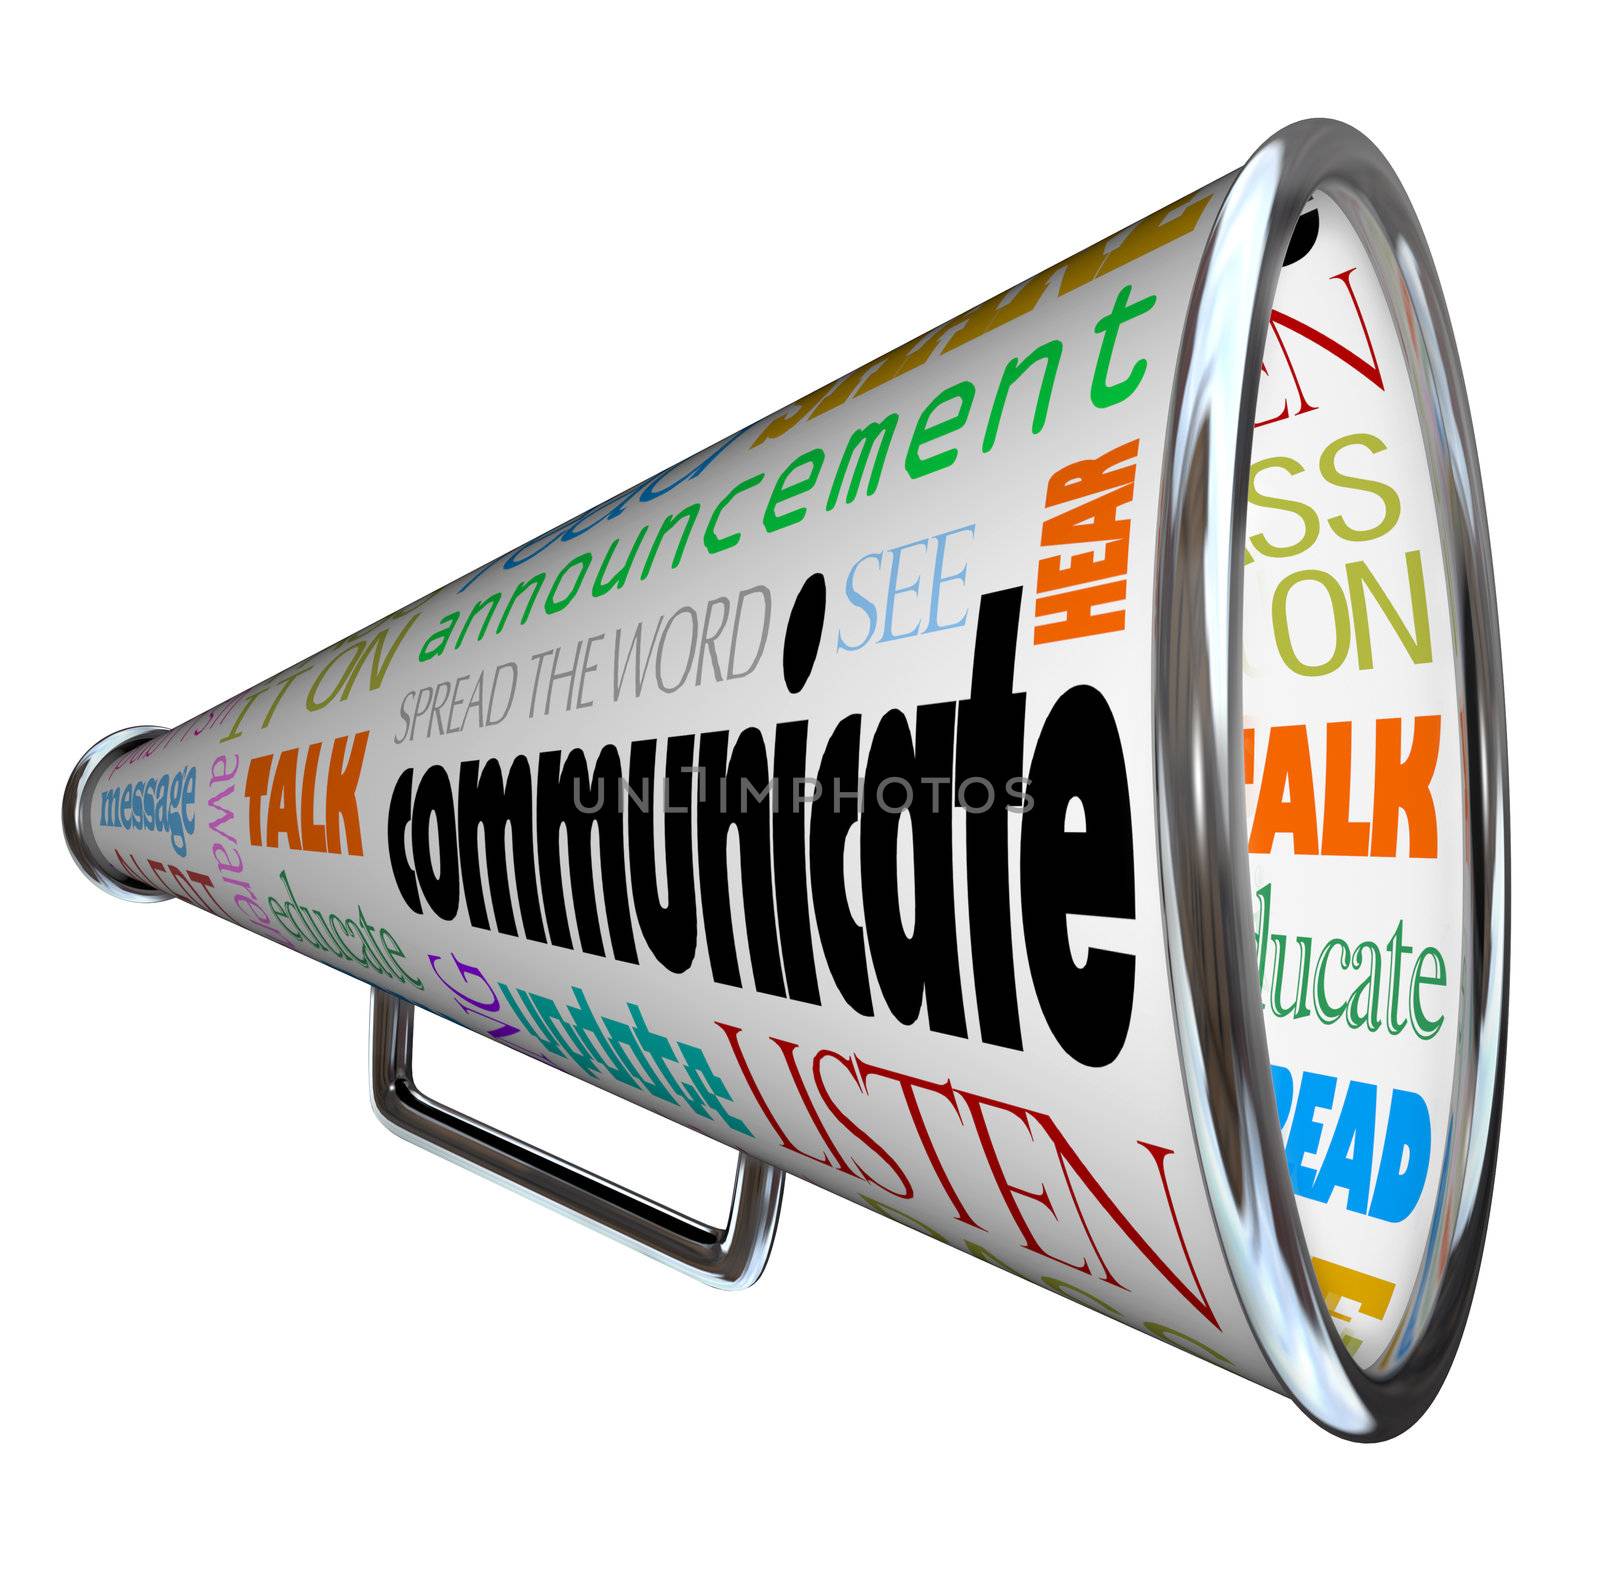 A bullhorn megaphone covered with words describing forms of communication such as talk, listen, hear, see, educate, update and more